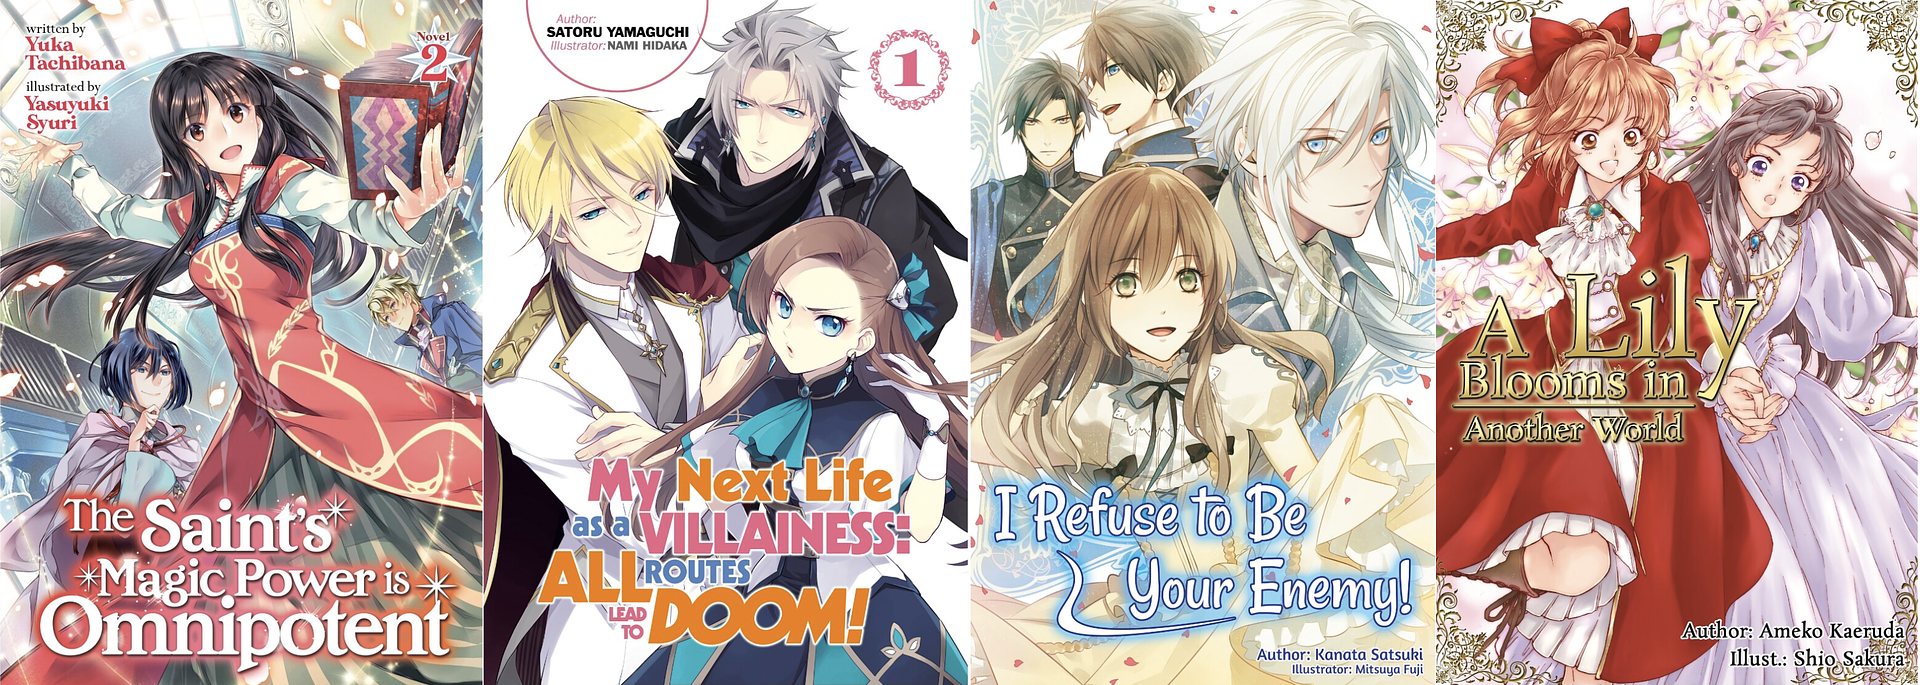 Covers of books I read from my backlog in February of 2023. Titles: The Saint's Magic Power is Omnipotent Vol. 2, My Next Life As a Villainess: All Routes Lead to Doom! Vol. 1, I Refuse to Be Your Enemy! Vol. 1, A Lily Blooms In Another World